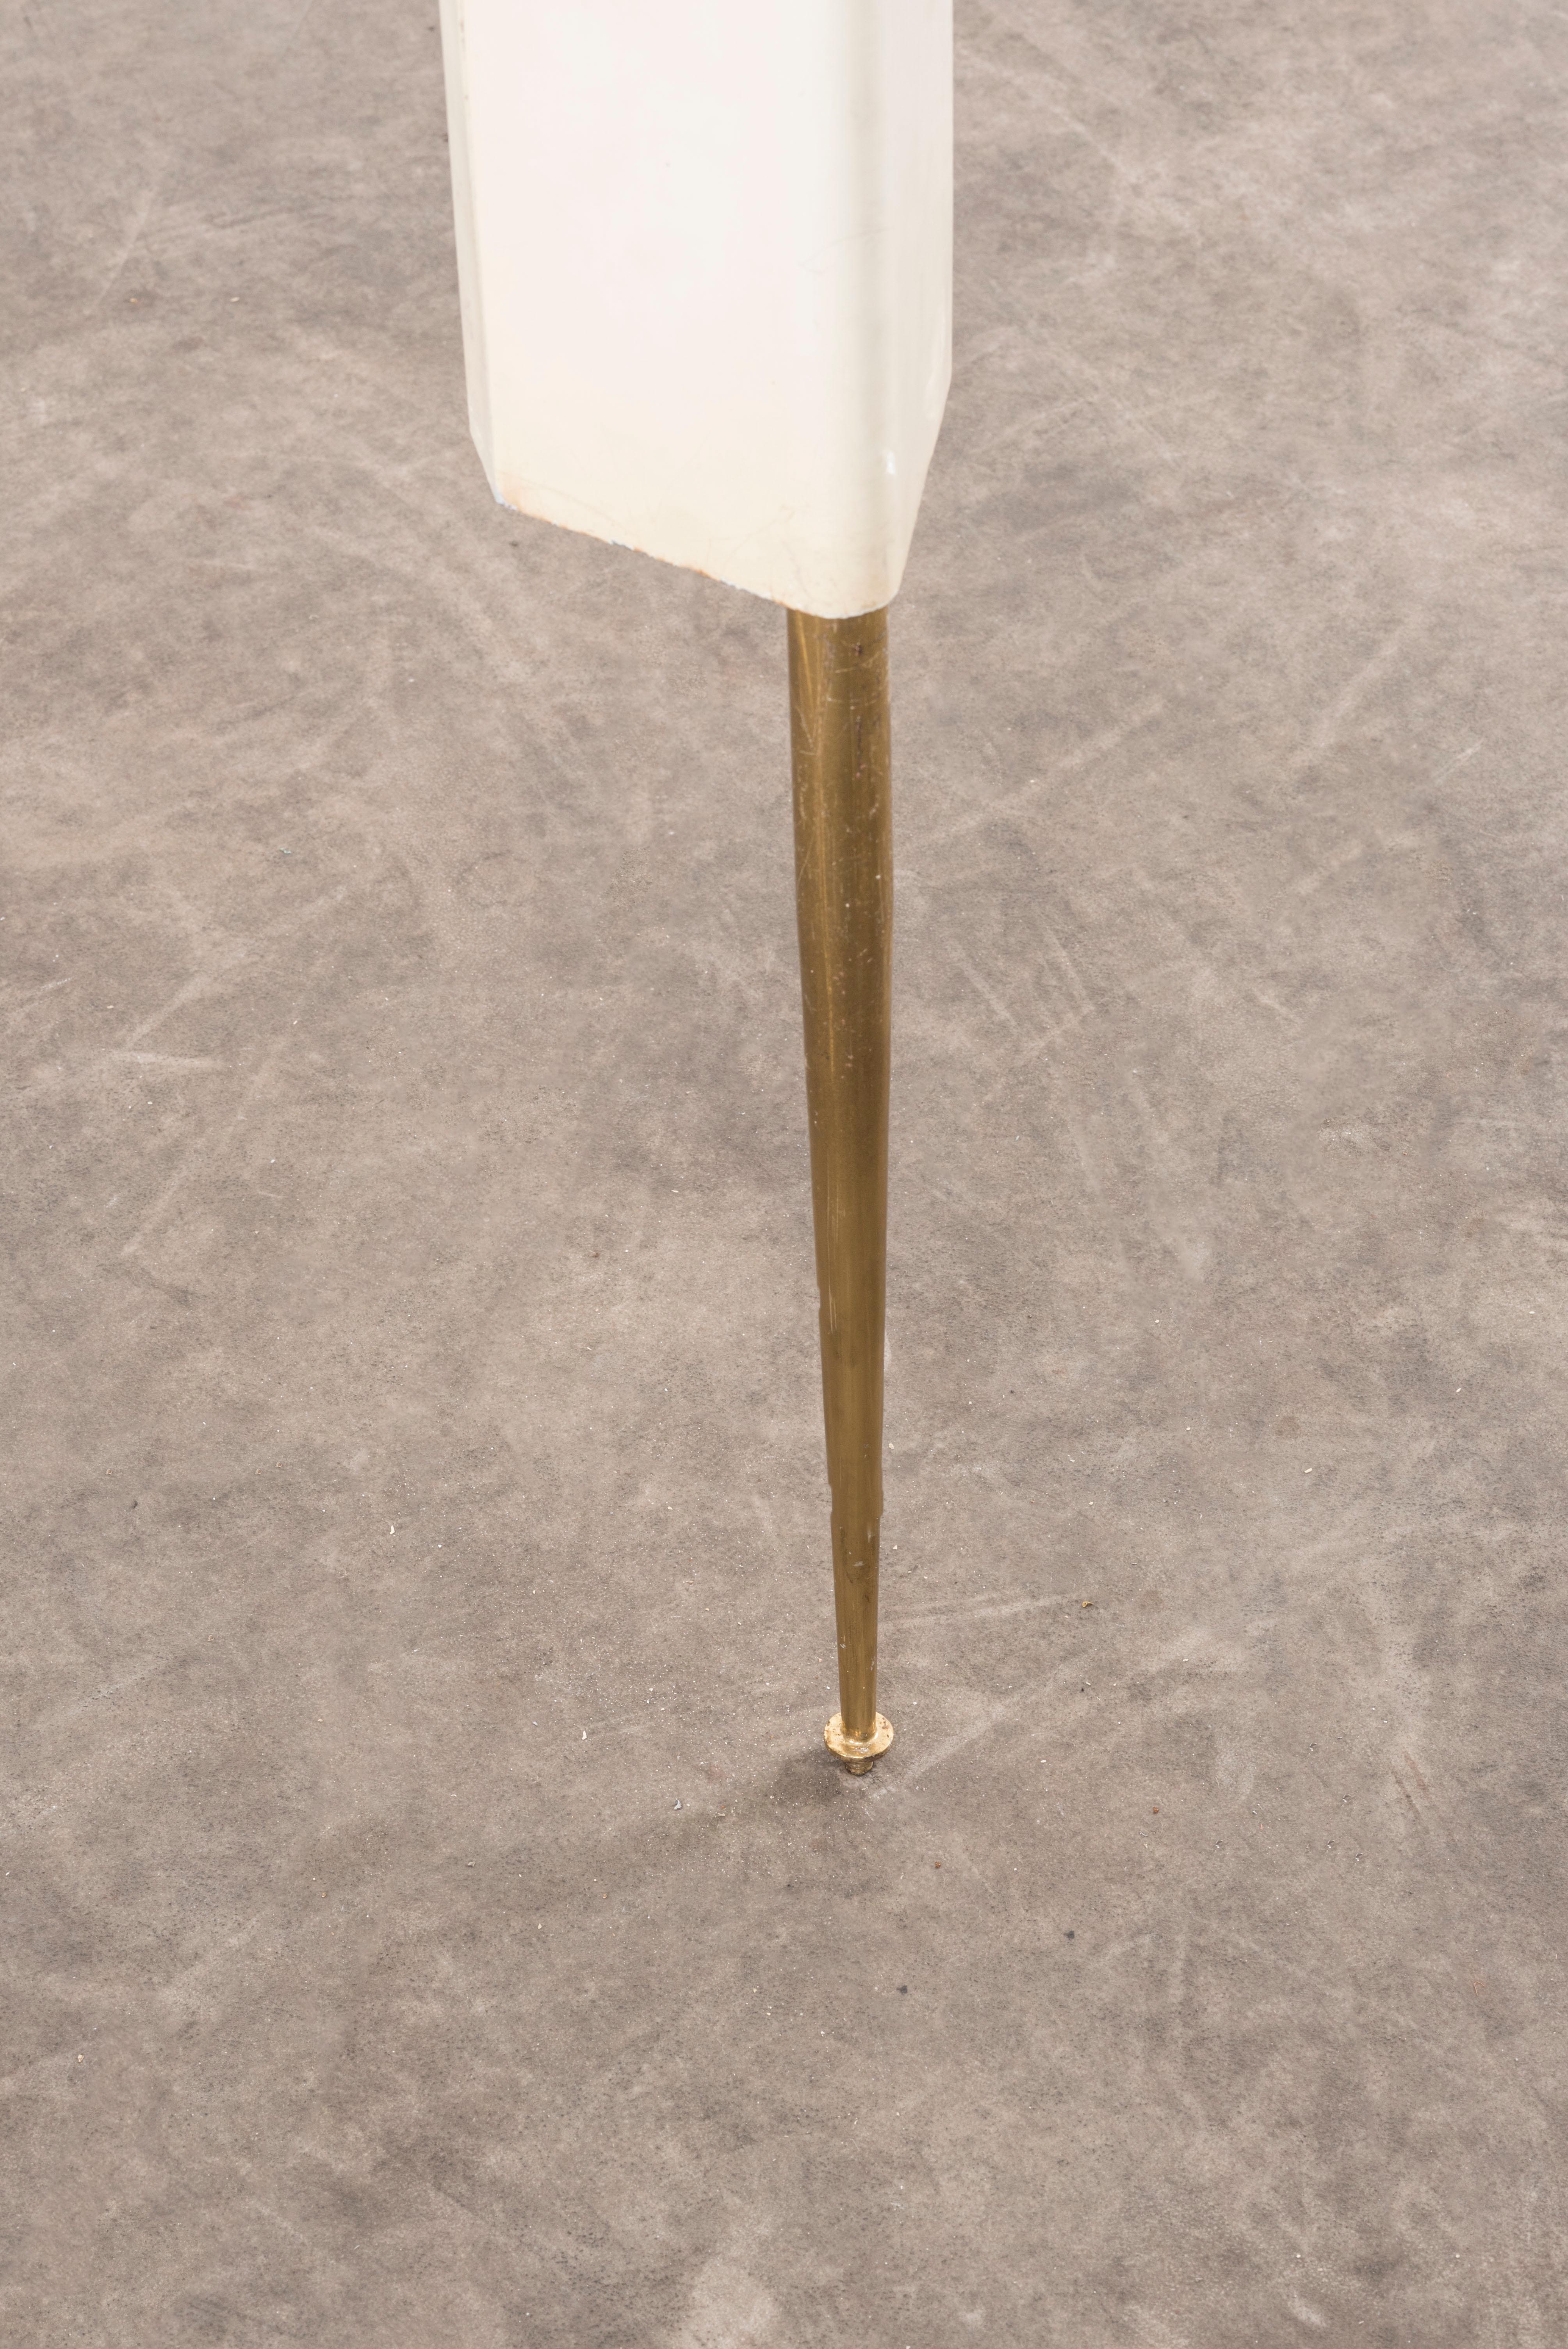 L78 floor lamp by Osvaldo Borsani,
Italy, 1950s. Designed for the X edition of the Triennale di Milano. Lacquered metal, neon lights. Measures: 11 x 13 x H 215 cm. 4.3 x 5.1 x H 84.6 in.
Please note: Prices do not include VAT. VAT may be applied